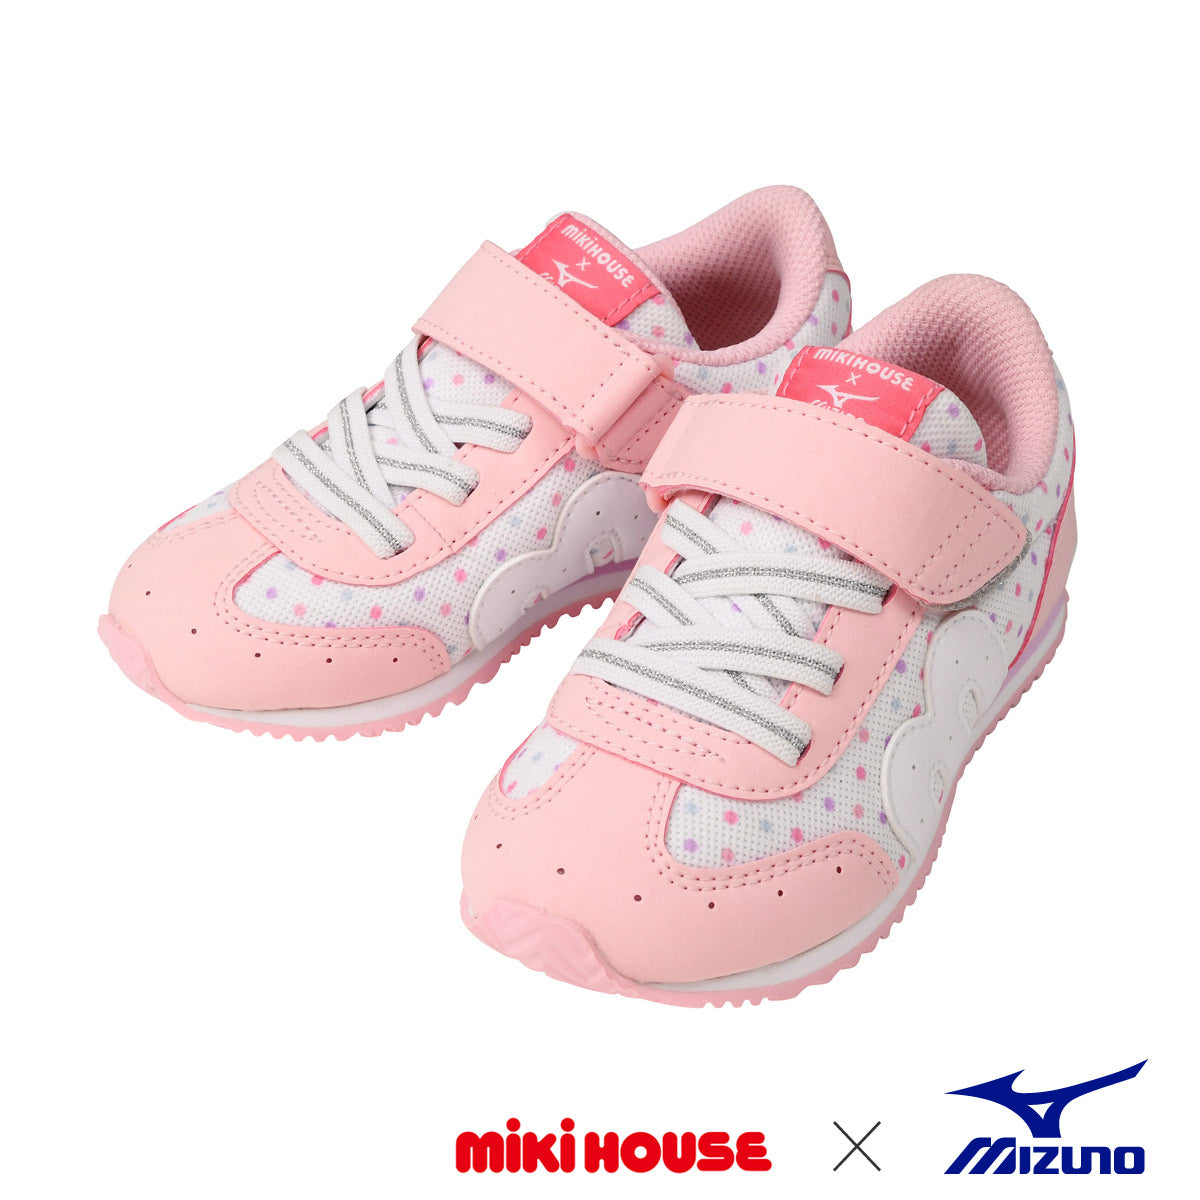 MIKIHOUSE SHOES